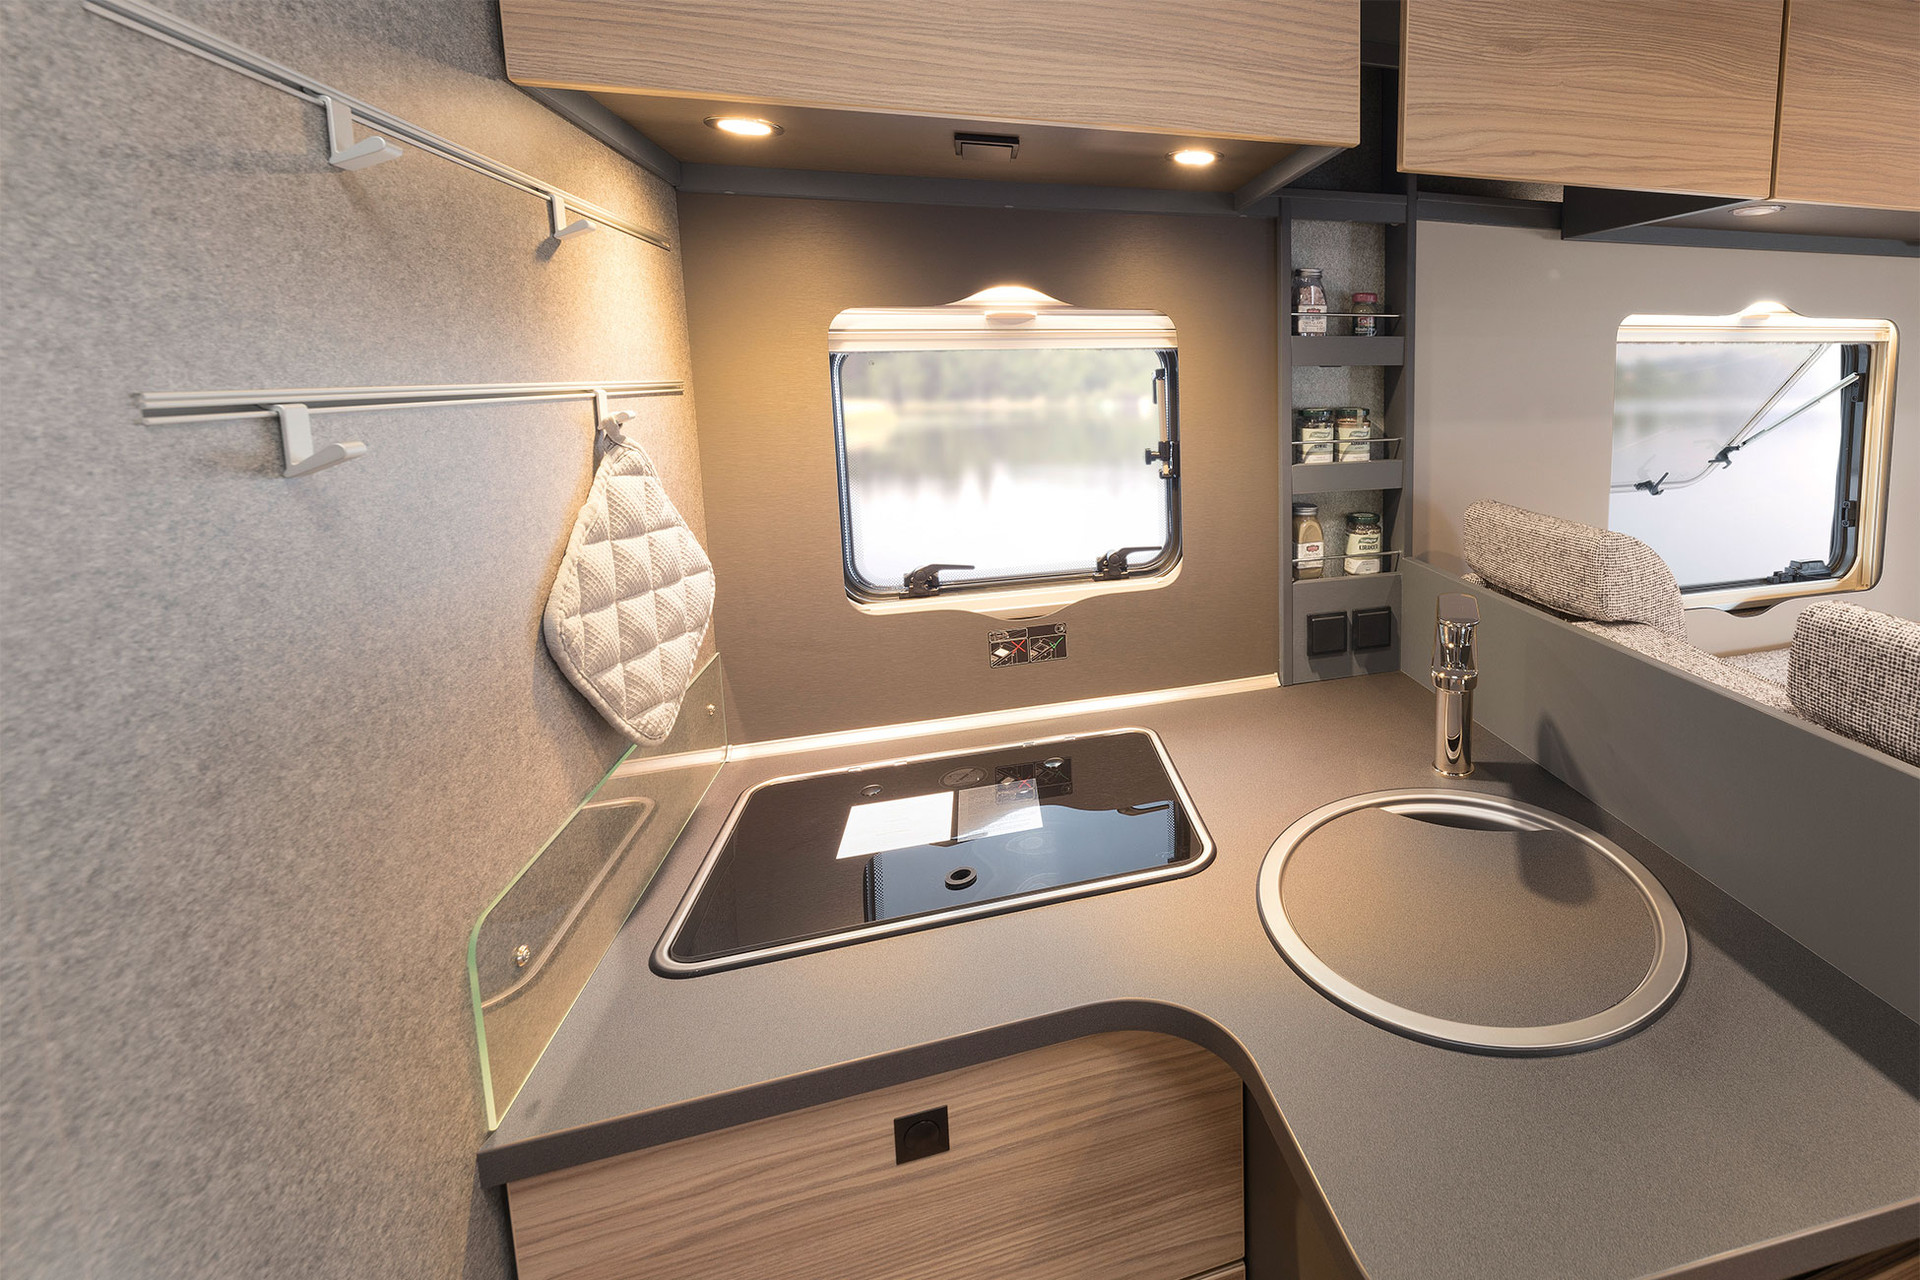 The smooth splashback is easy to keep clean and includes a practical spice rack. There is space for a coffee machine at the rear – including two power connections